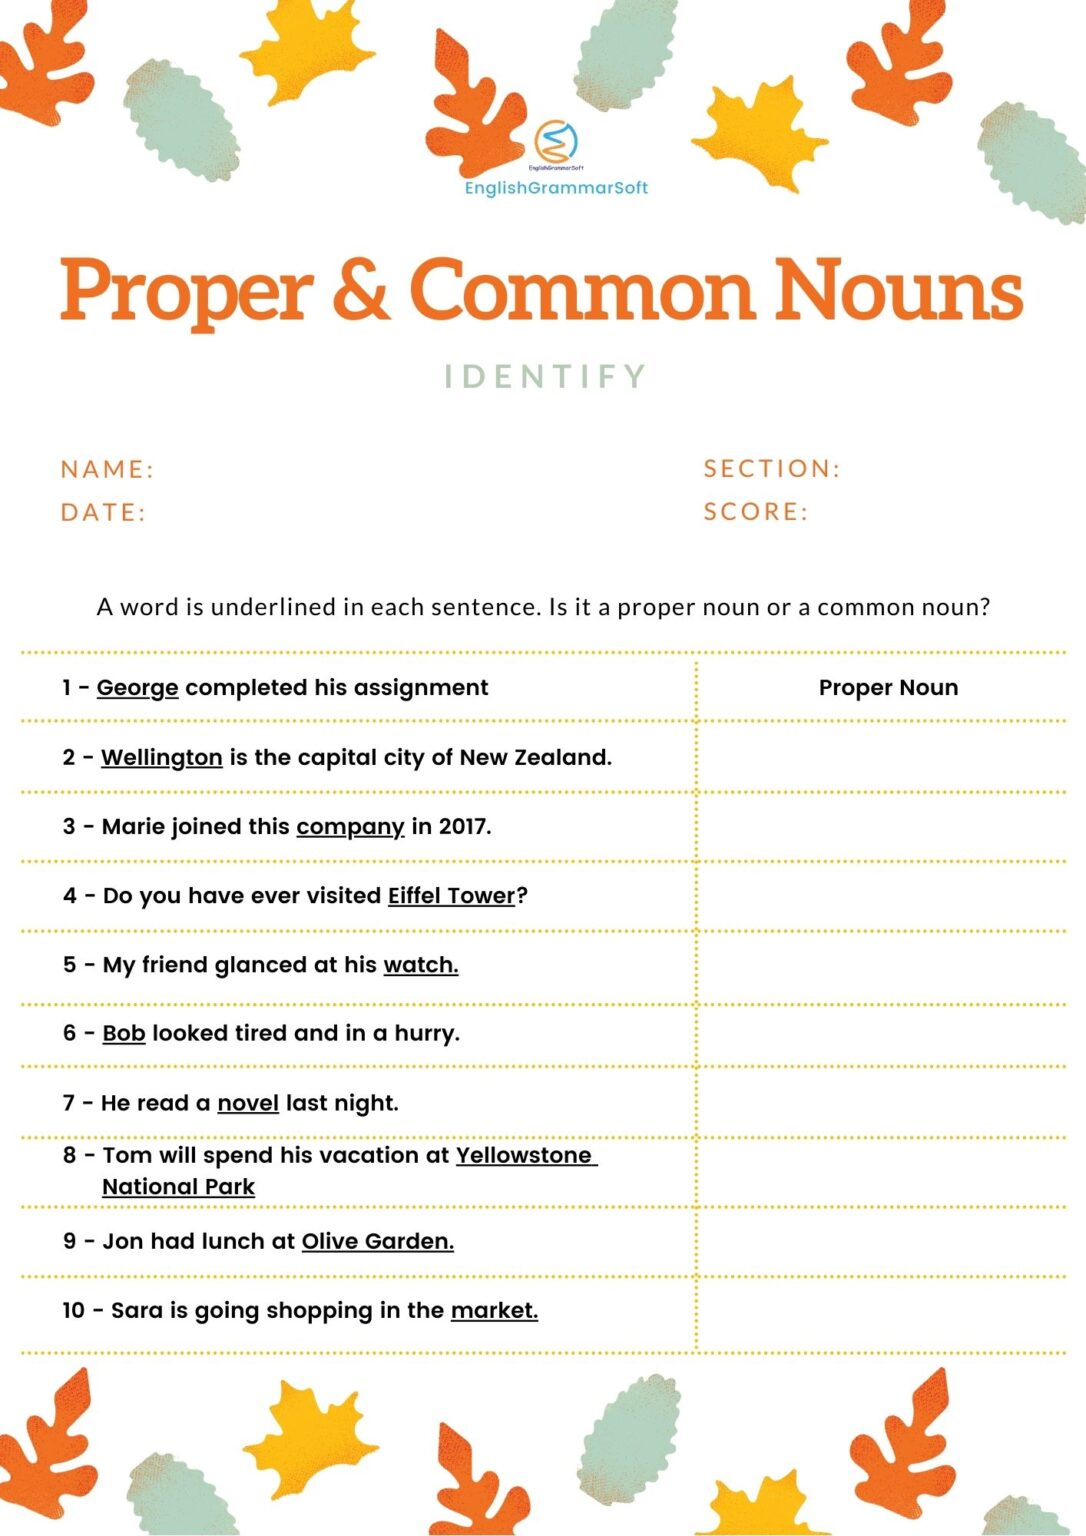 common-and-proper-nouns-worksheets-from-the-teacher-s-guide-proper-nouns-worksheet-proper